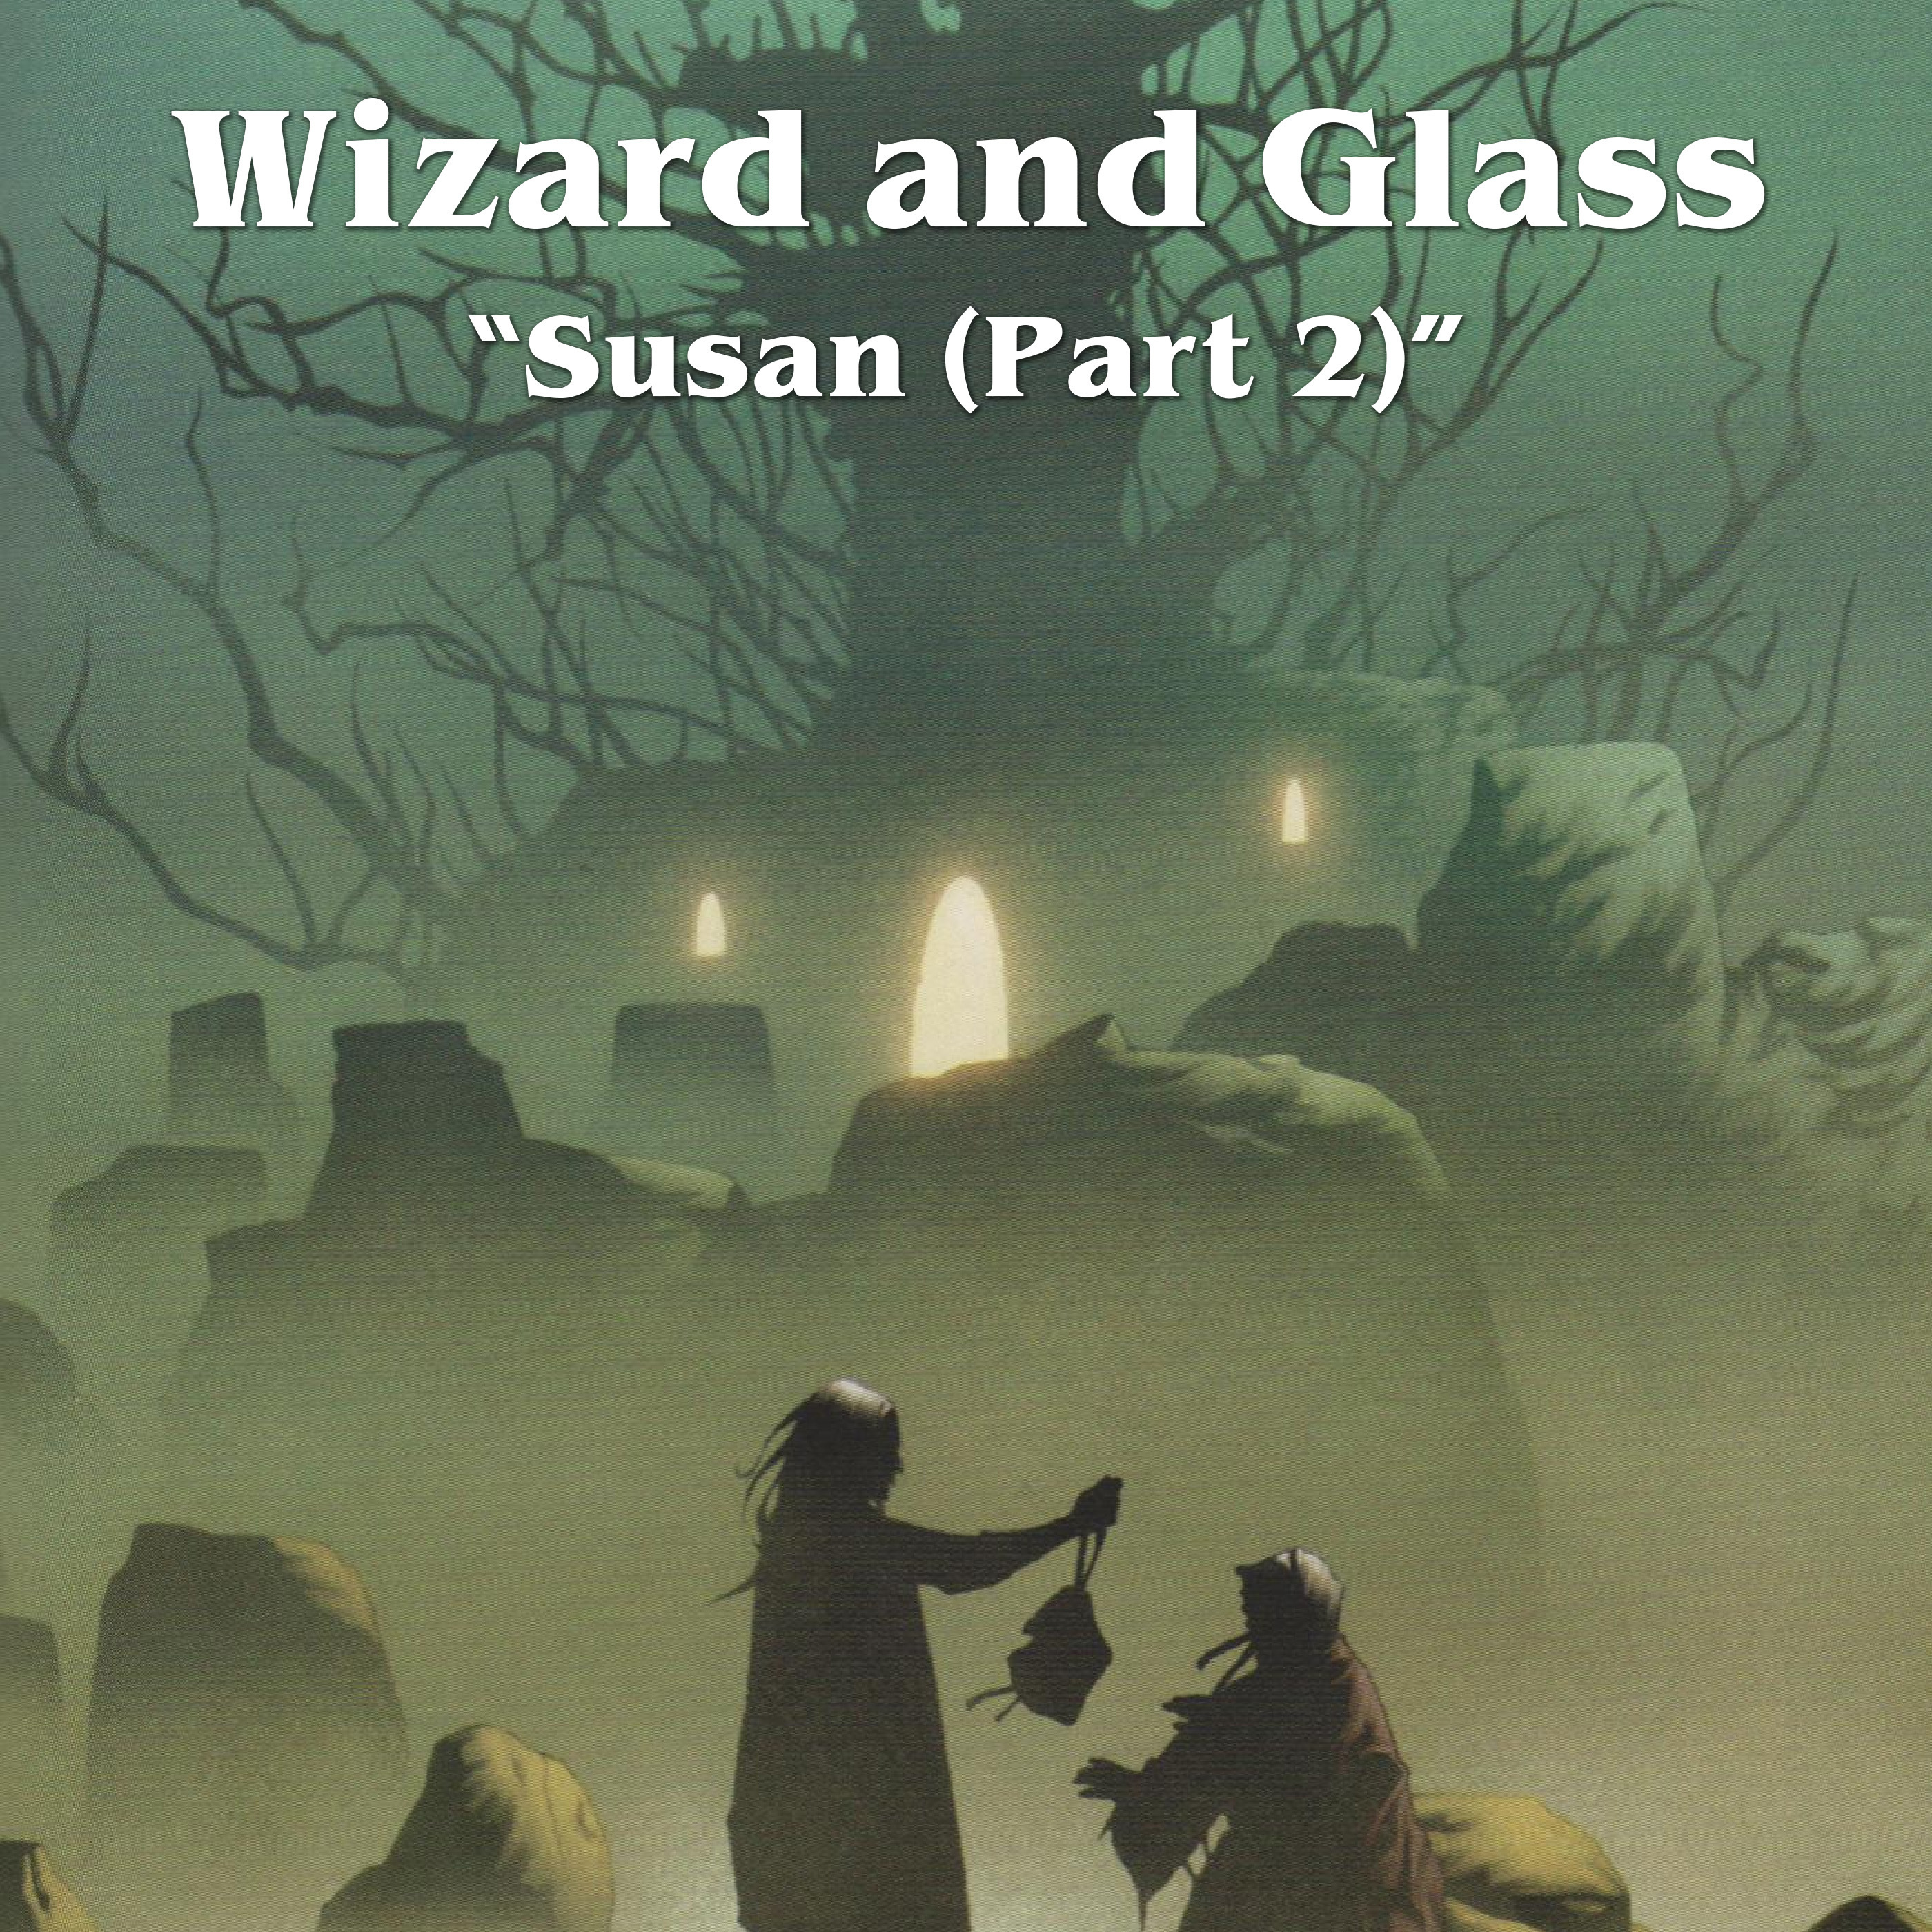 Episode 28: Wizard and Glass, 